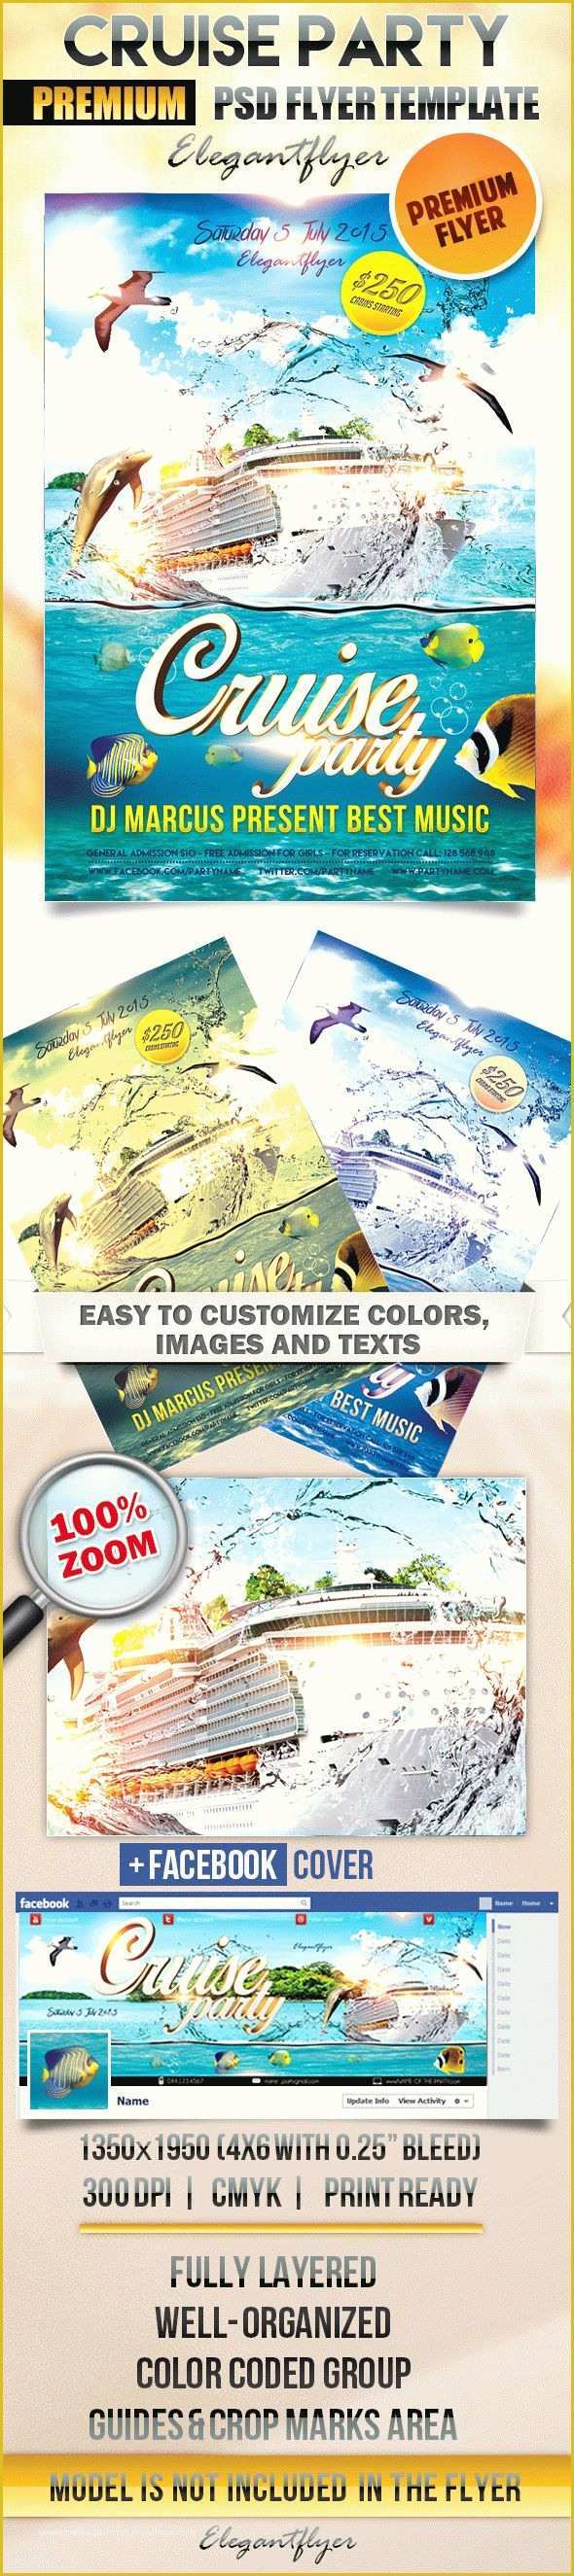 Free Cruise Ship Flyer Template Of Flyer for Cruise theme Party – by Elegantflyer